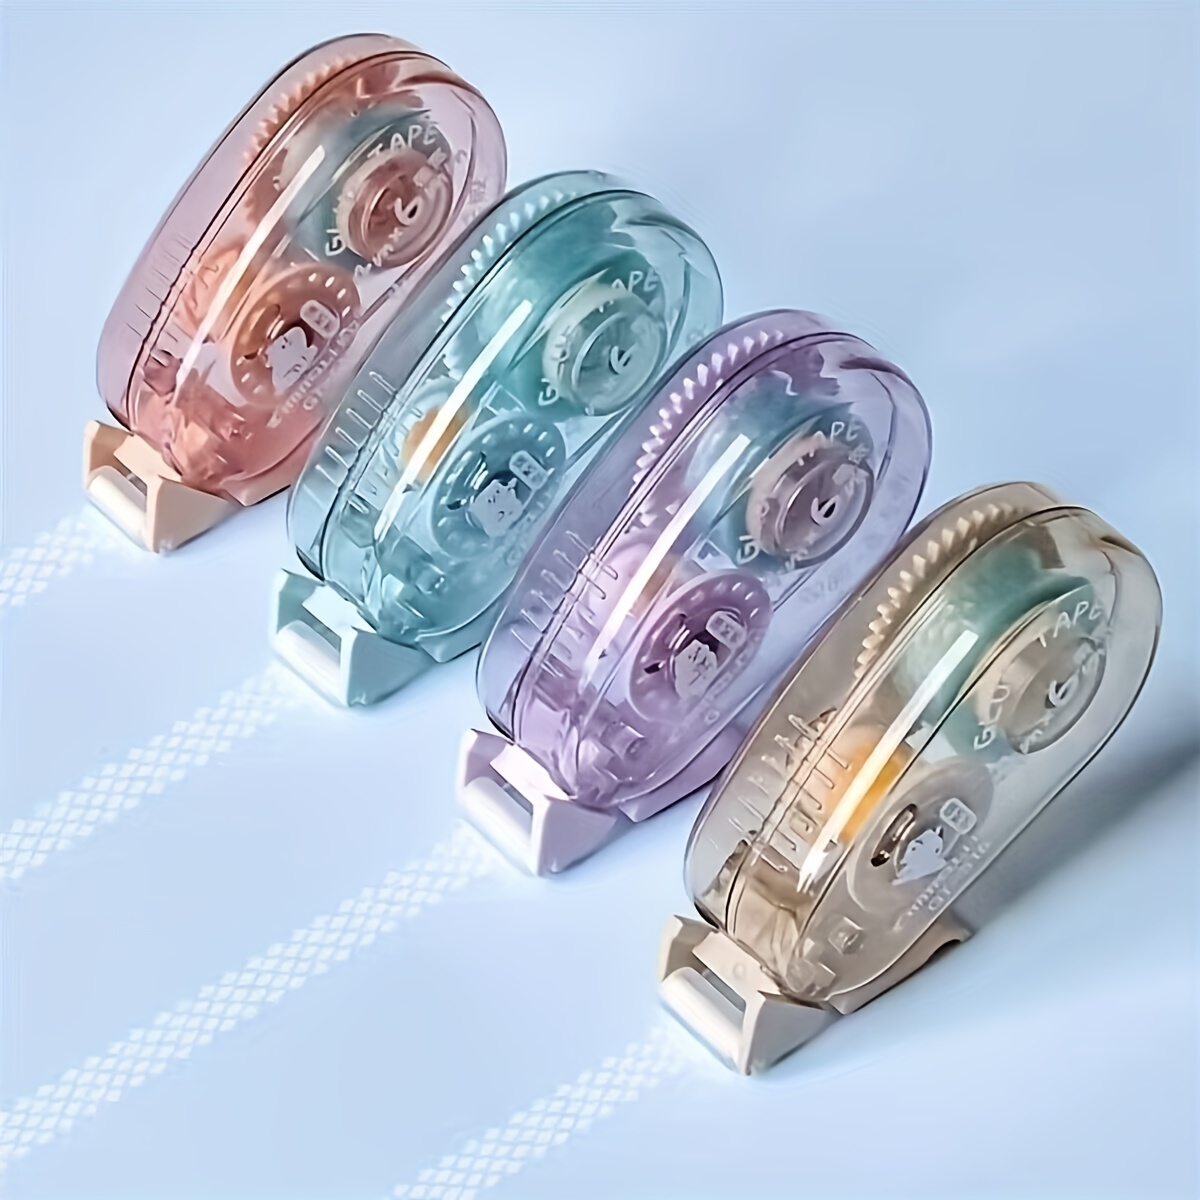 1PC Creative Portable Correction Tape And Point Glue 2 In 1 Learning  Stationery Double Sided Adhesive School Office Supplies